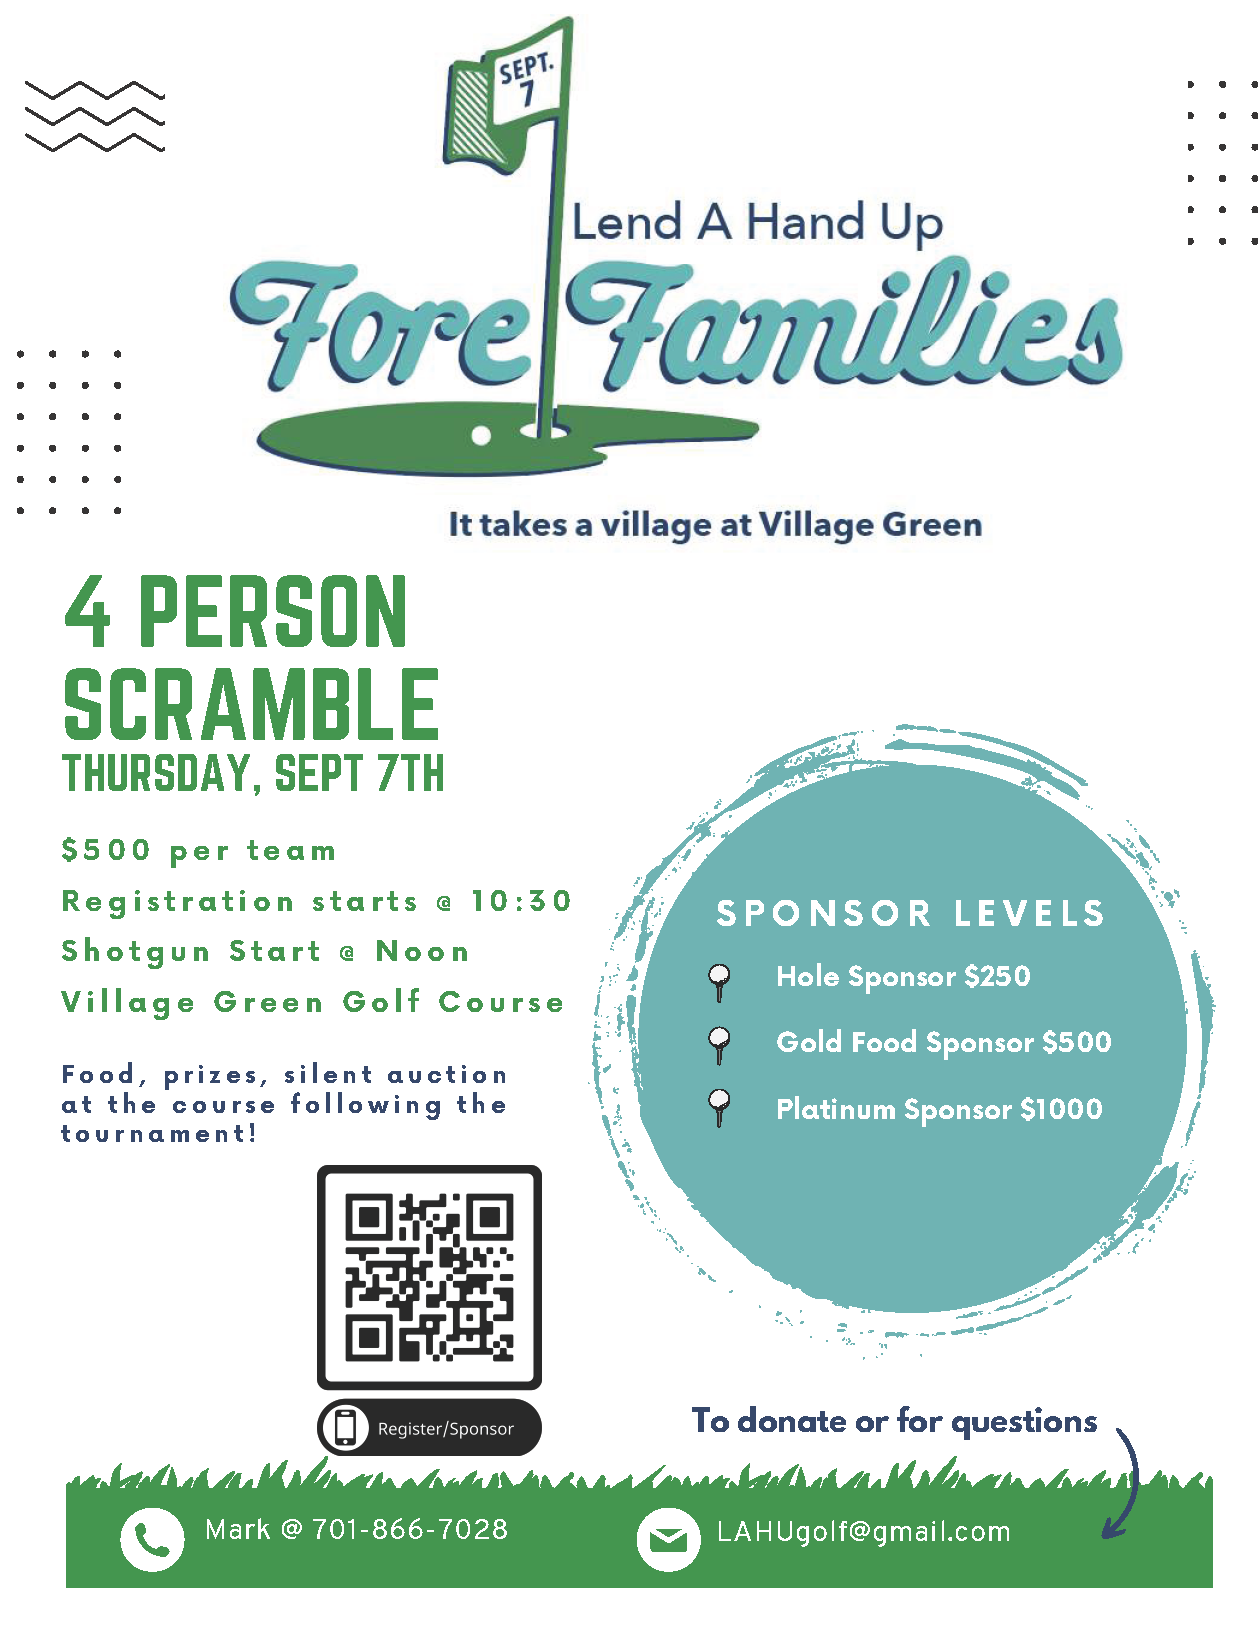 Lend A Hand Up Fore Families Poster page of information